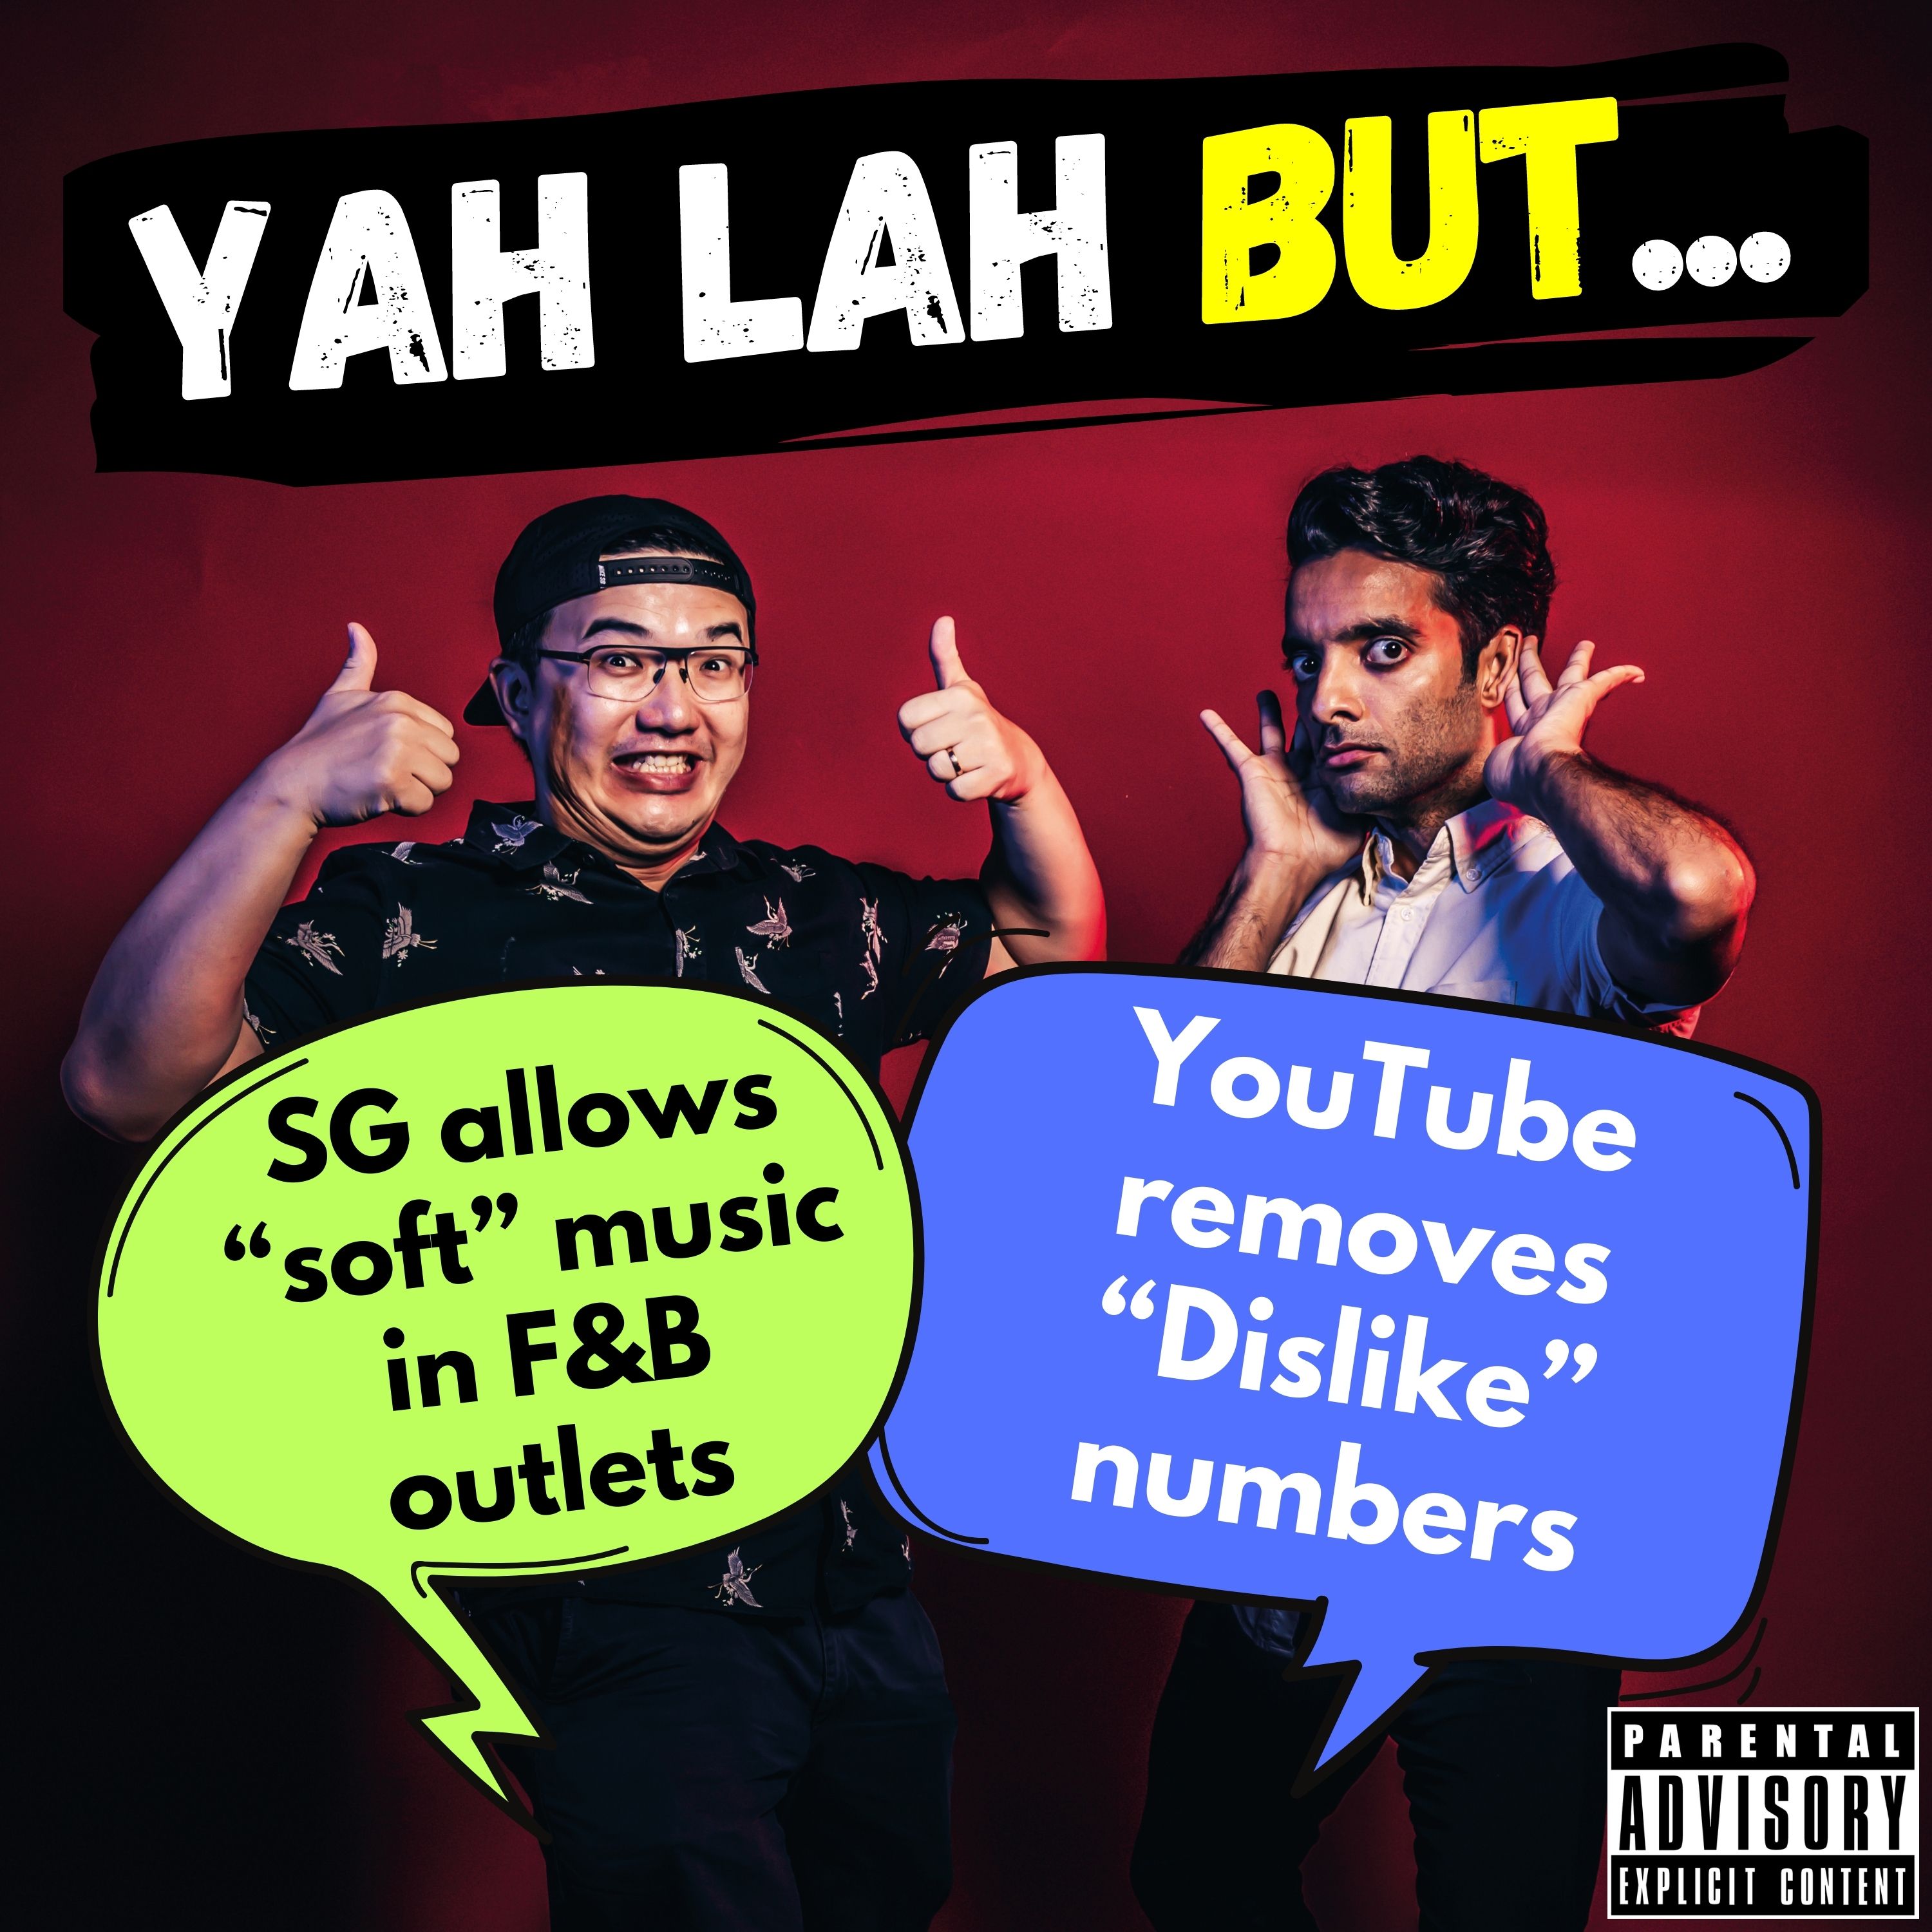 #231 - SG allows “soft” music in F&B outlets & YouTube removes “Dislike” numbers